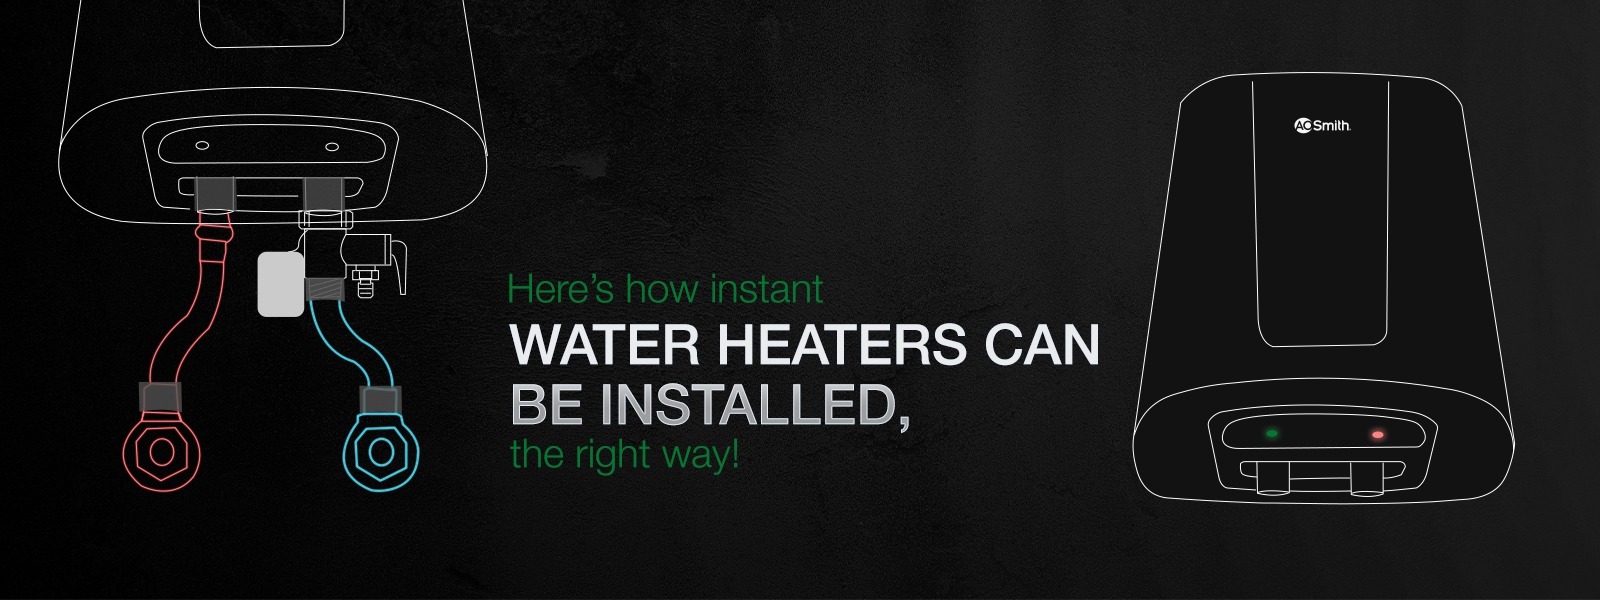 Here’s how instant water heaters can be installed, the right way!